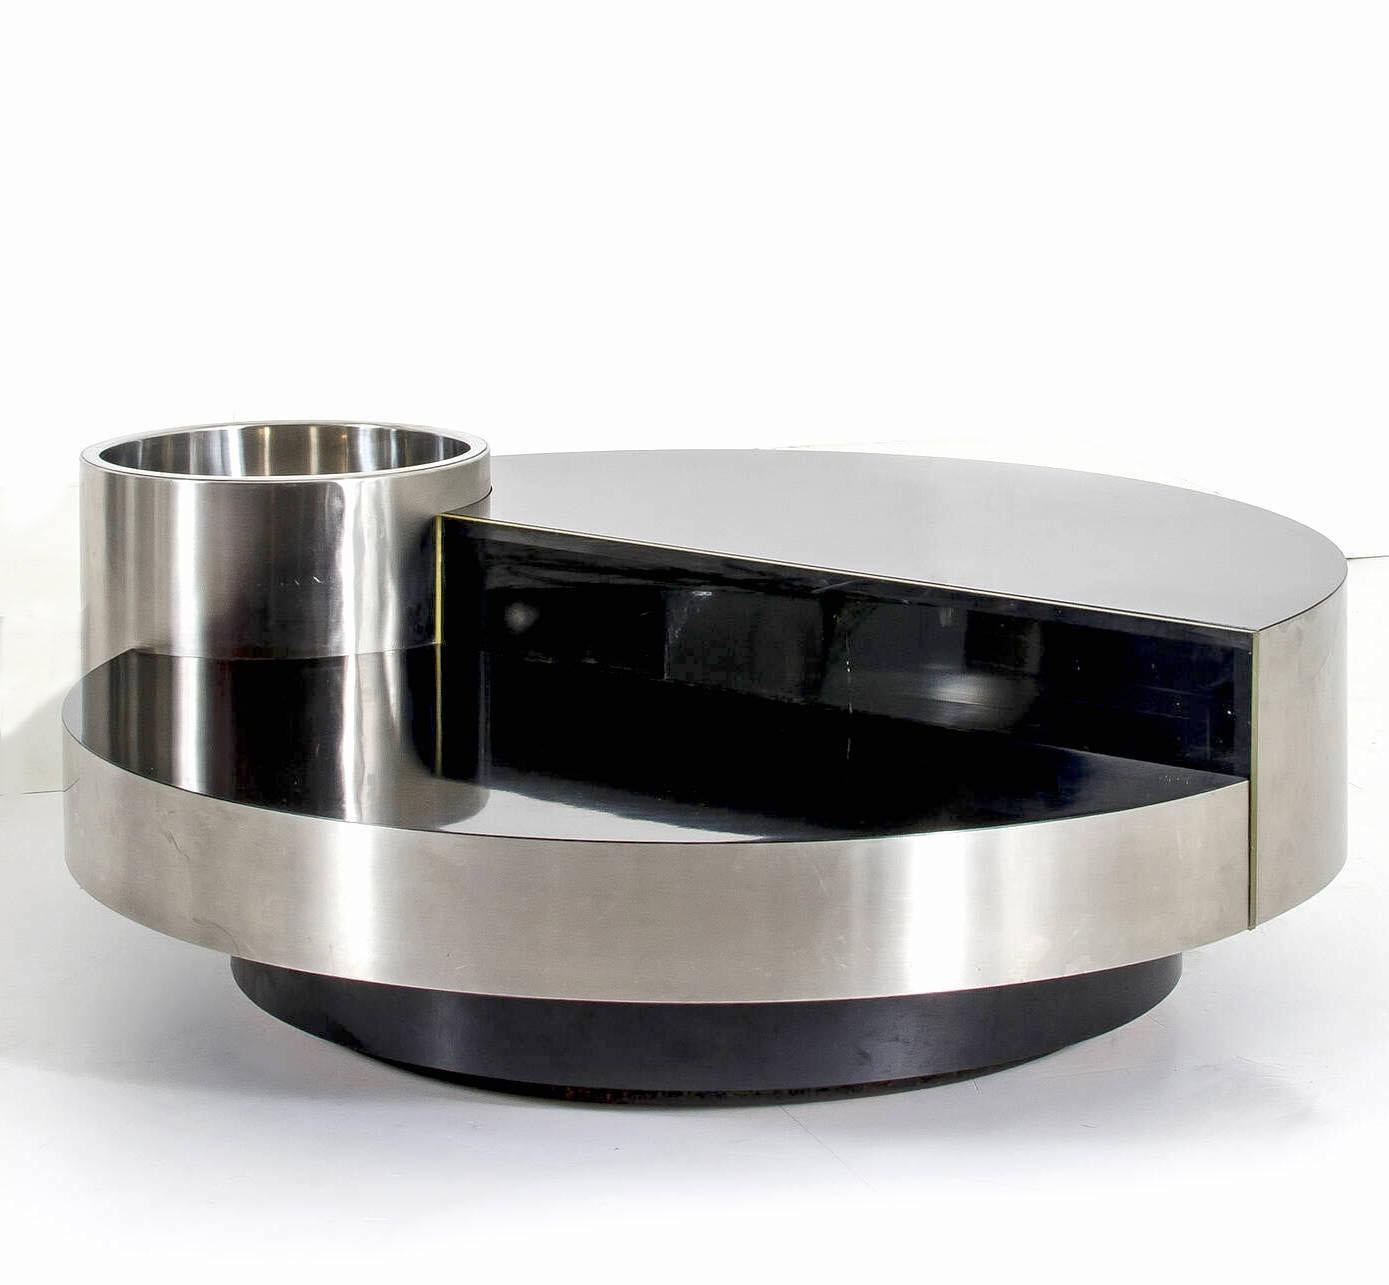 Willy Rizzo, coffee table, metal and lacquer, 1970s, Italy.
Rotating and hinged design opens to reveal illuminated bar.
This iconic cocktail table is designed by Willy Rizzo. His cocktail tables are amongst his most prolific and therefore most